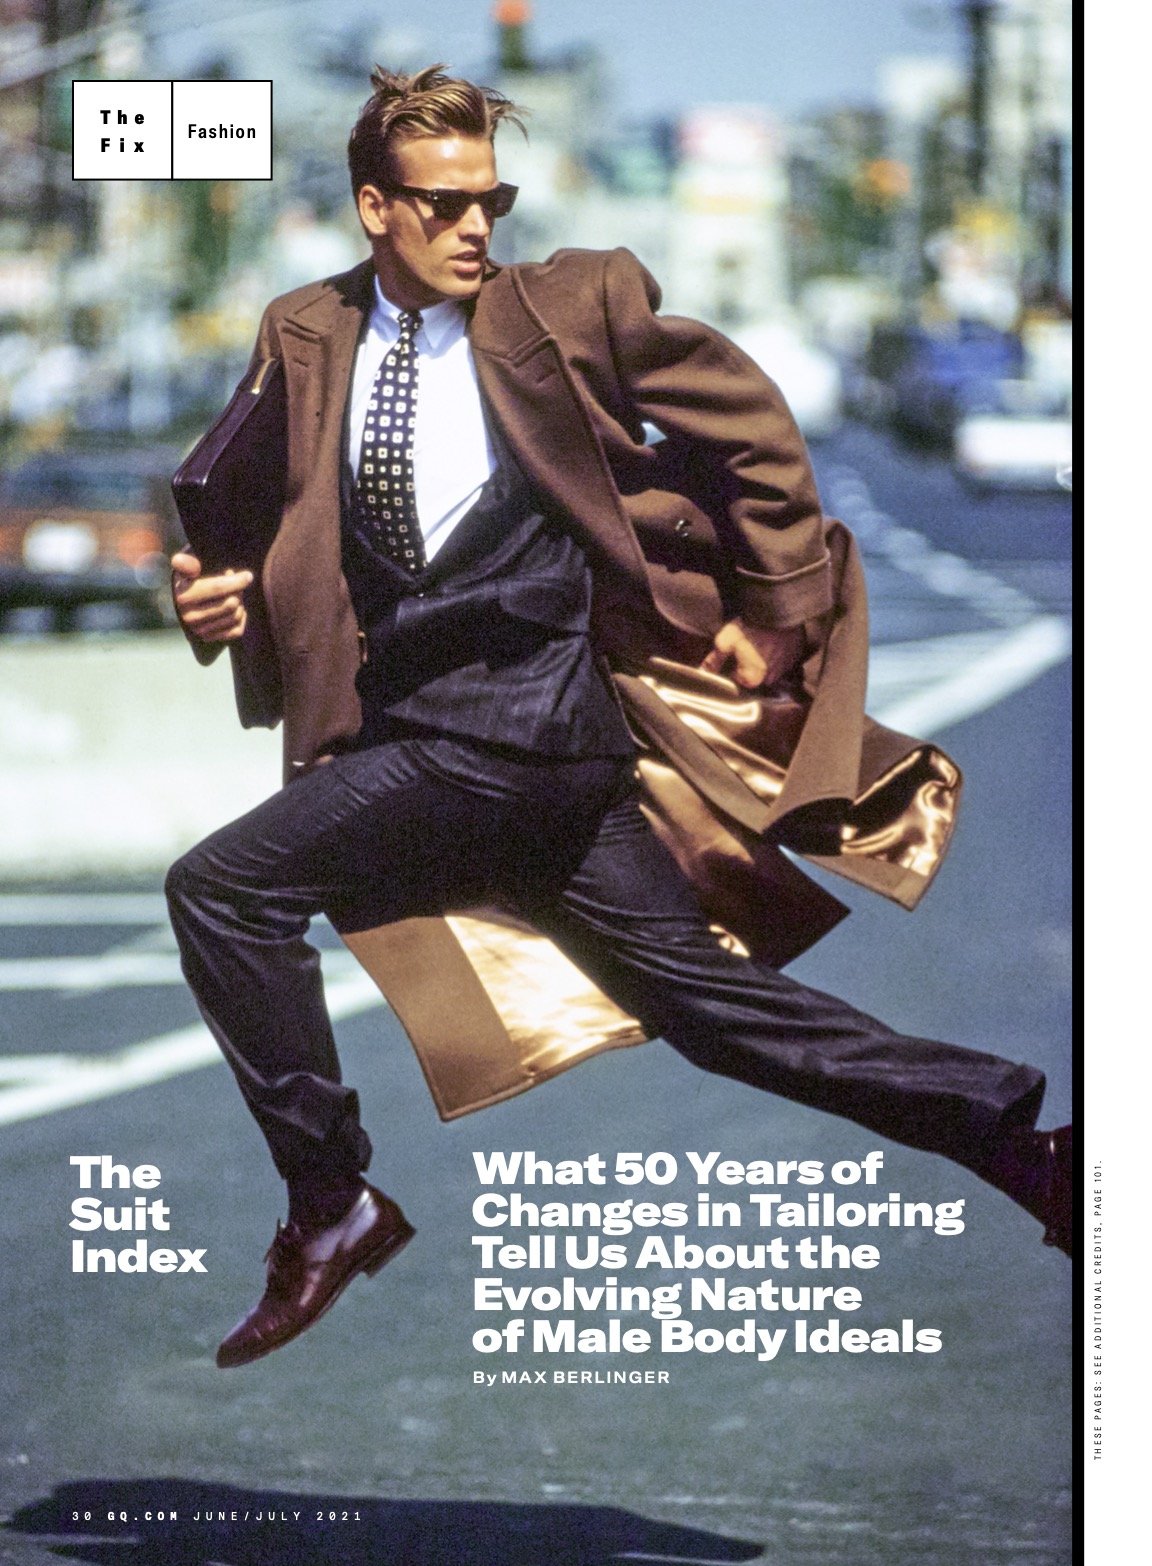 GQ June-July 2021 - Suiting Index (50 Year Timeline).jpg